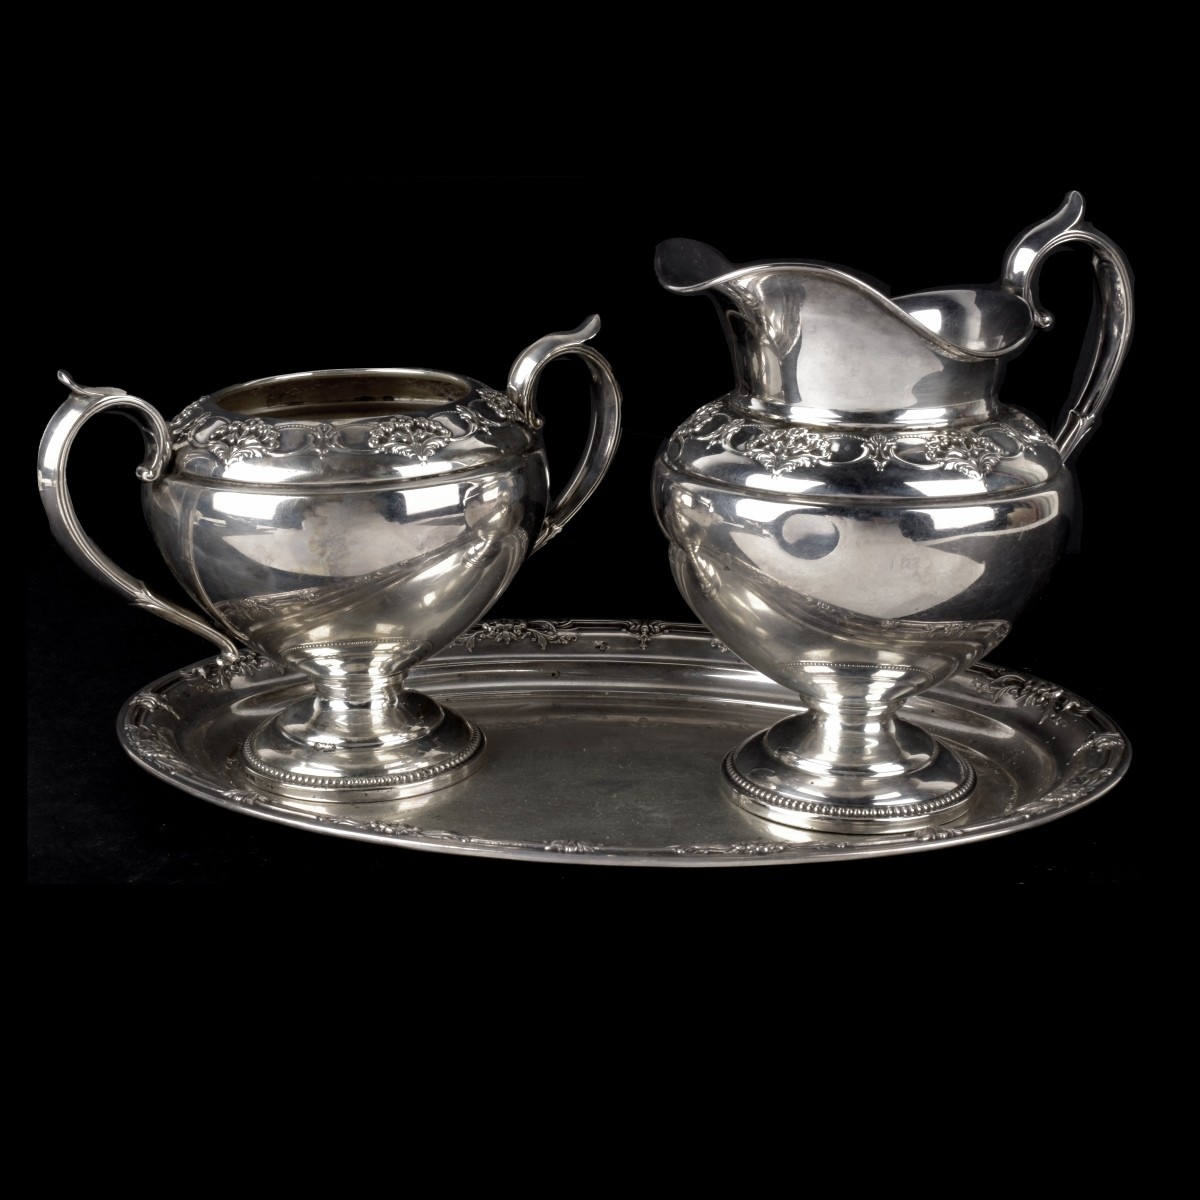 International Sterling Cream and Sugar with Tray